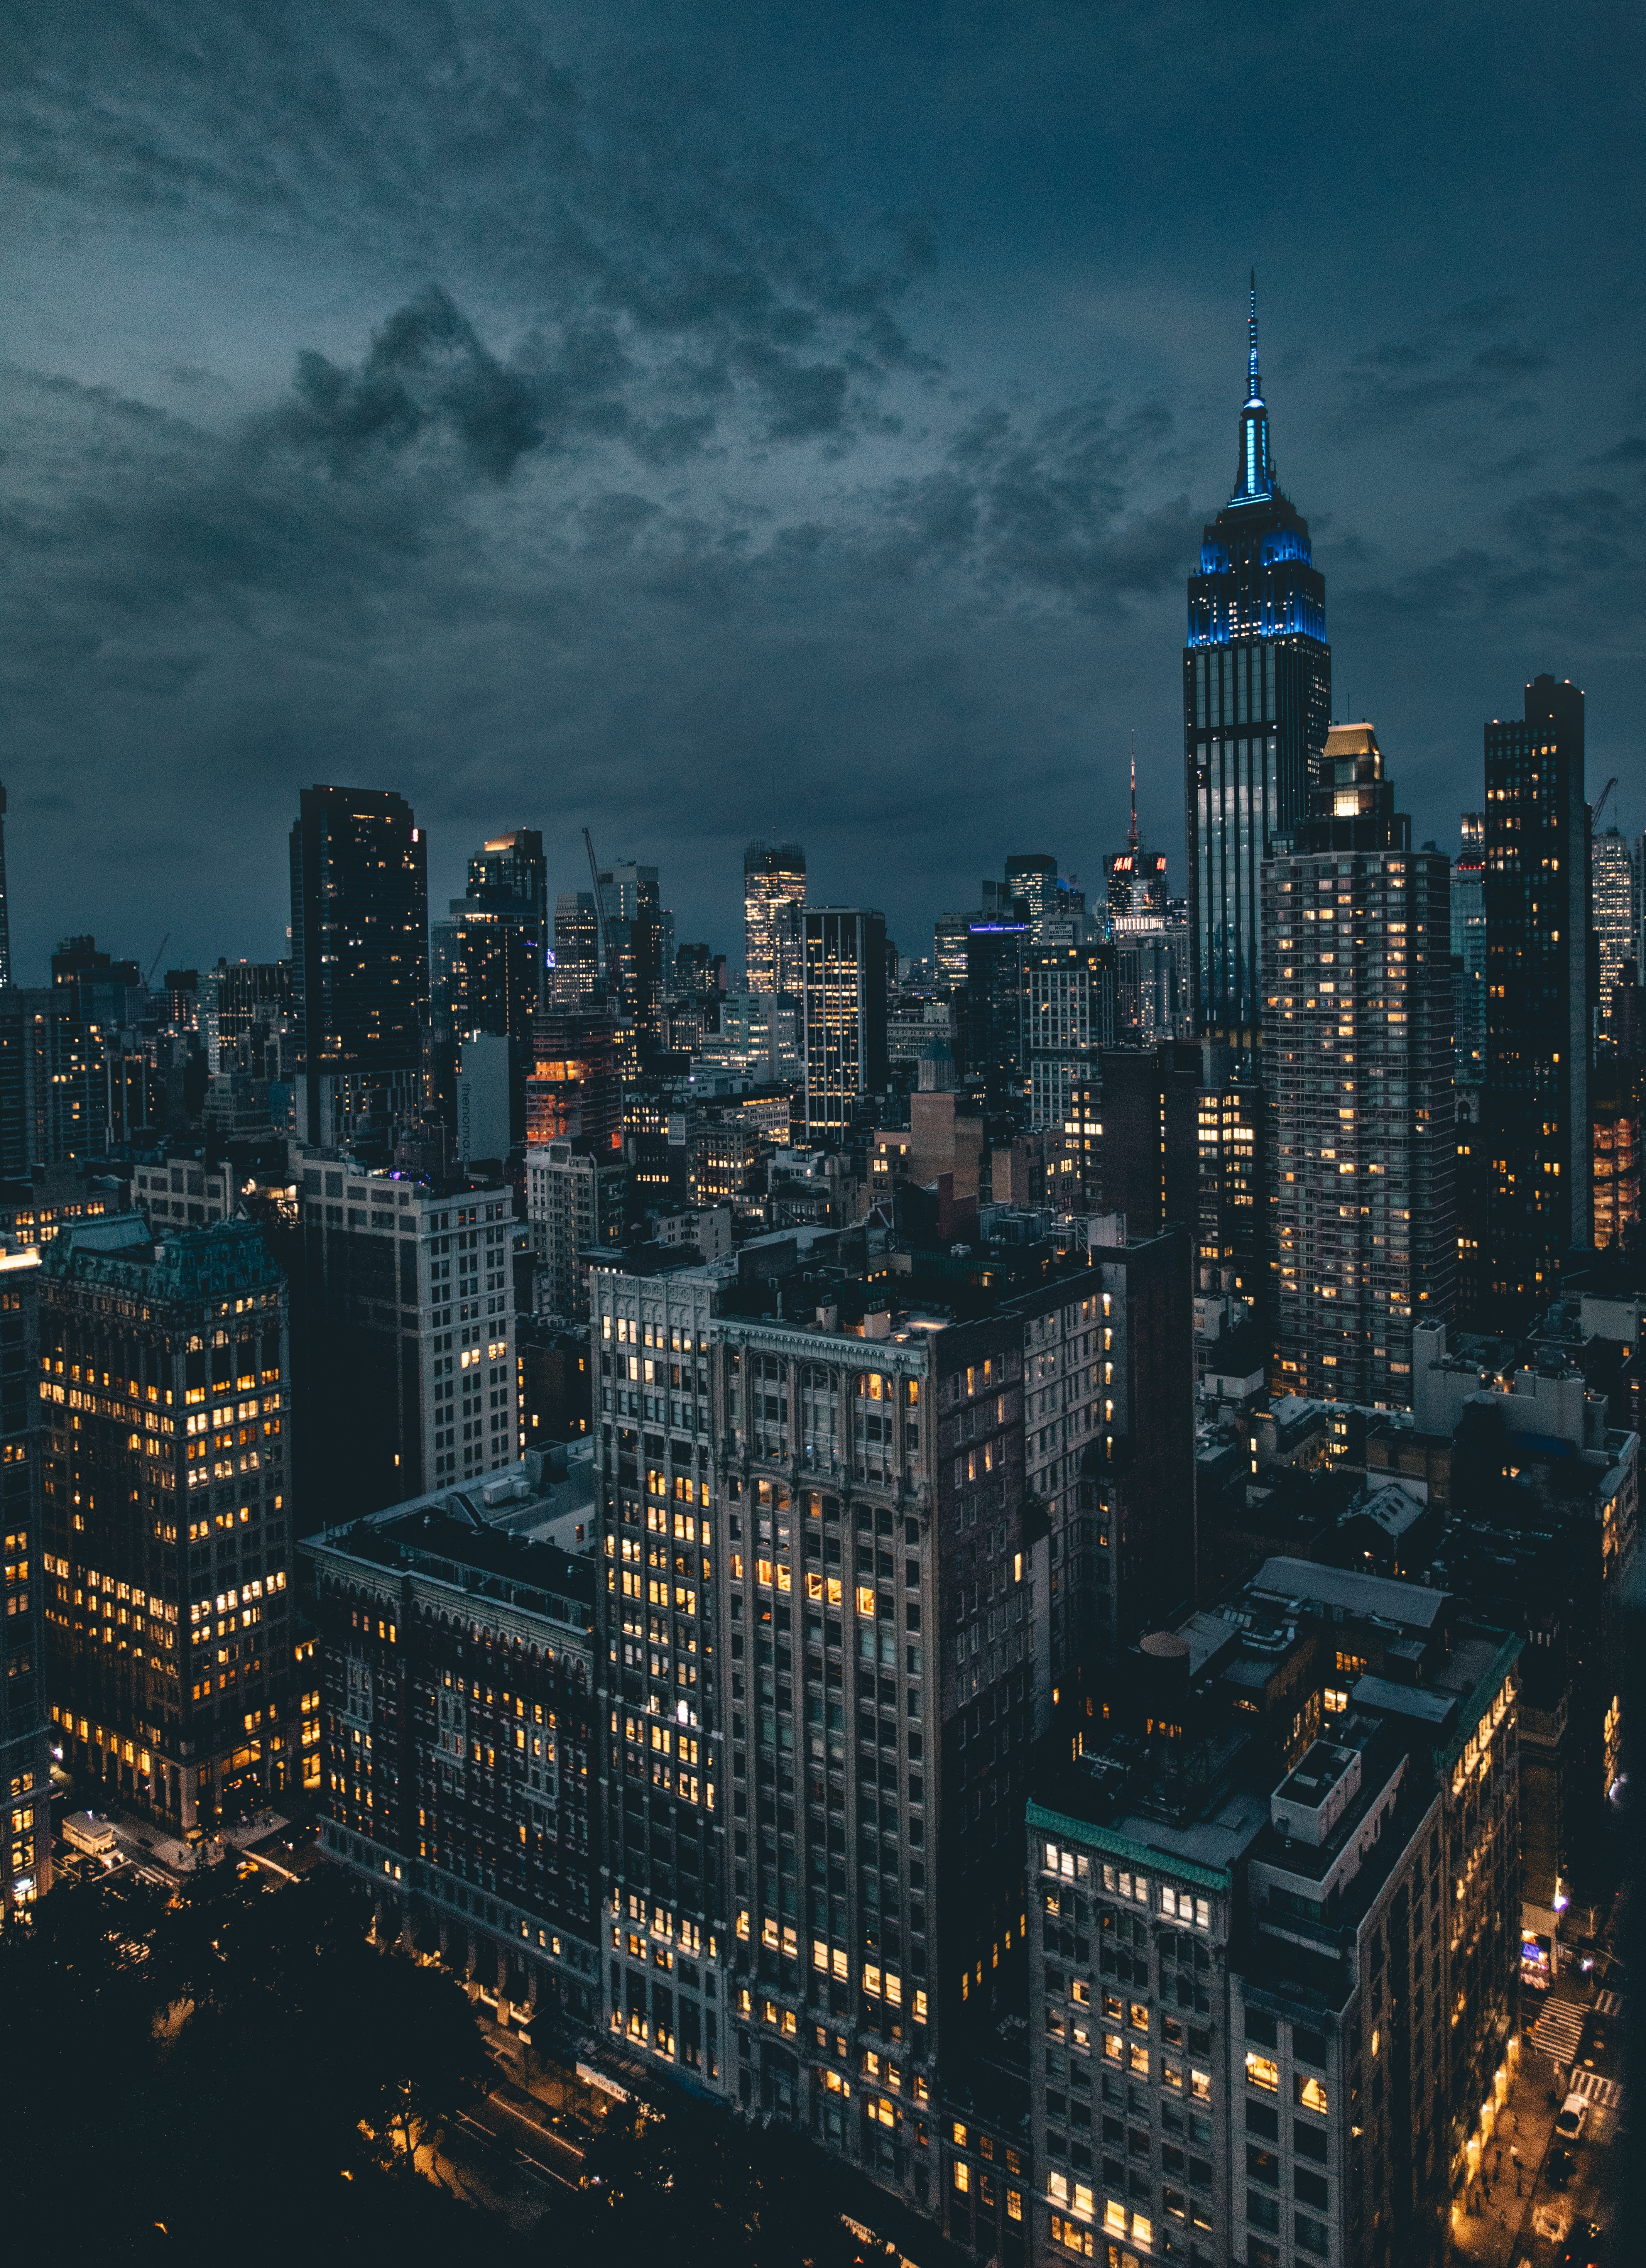 Download wallpaper 4266x5877 night city, skyscrapers, city lights, new  york, usa, night, clouds hd background